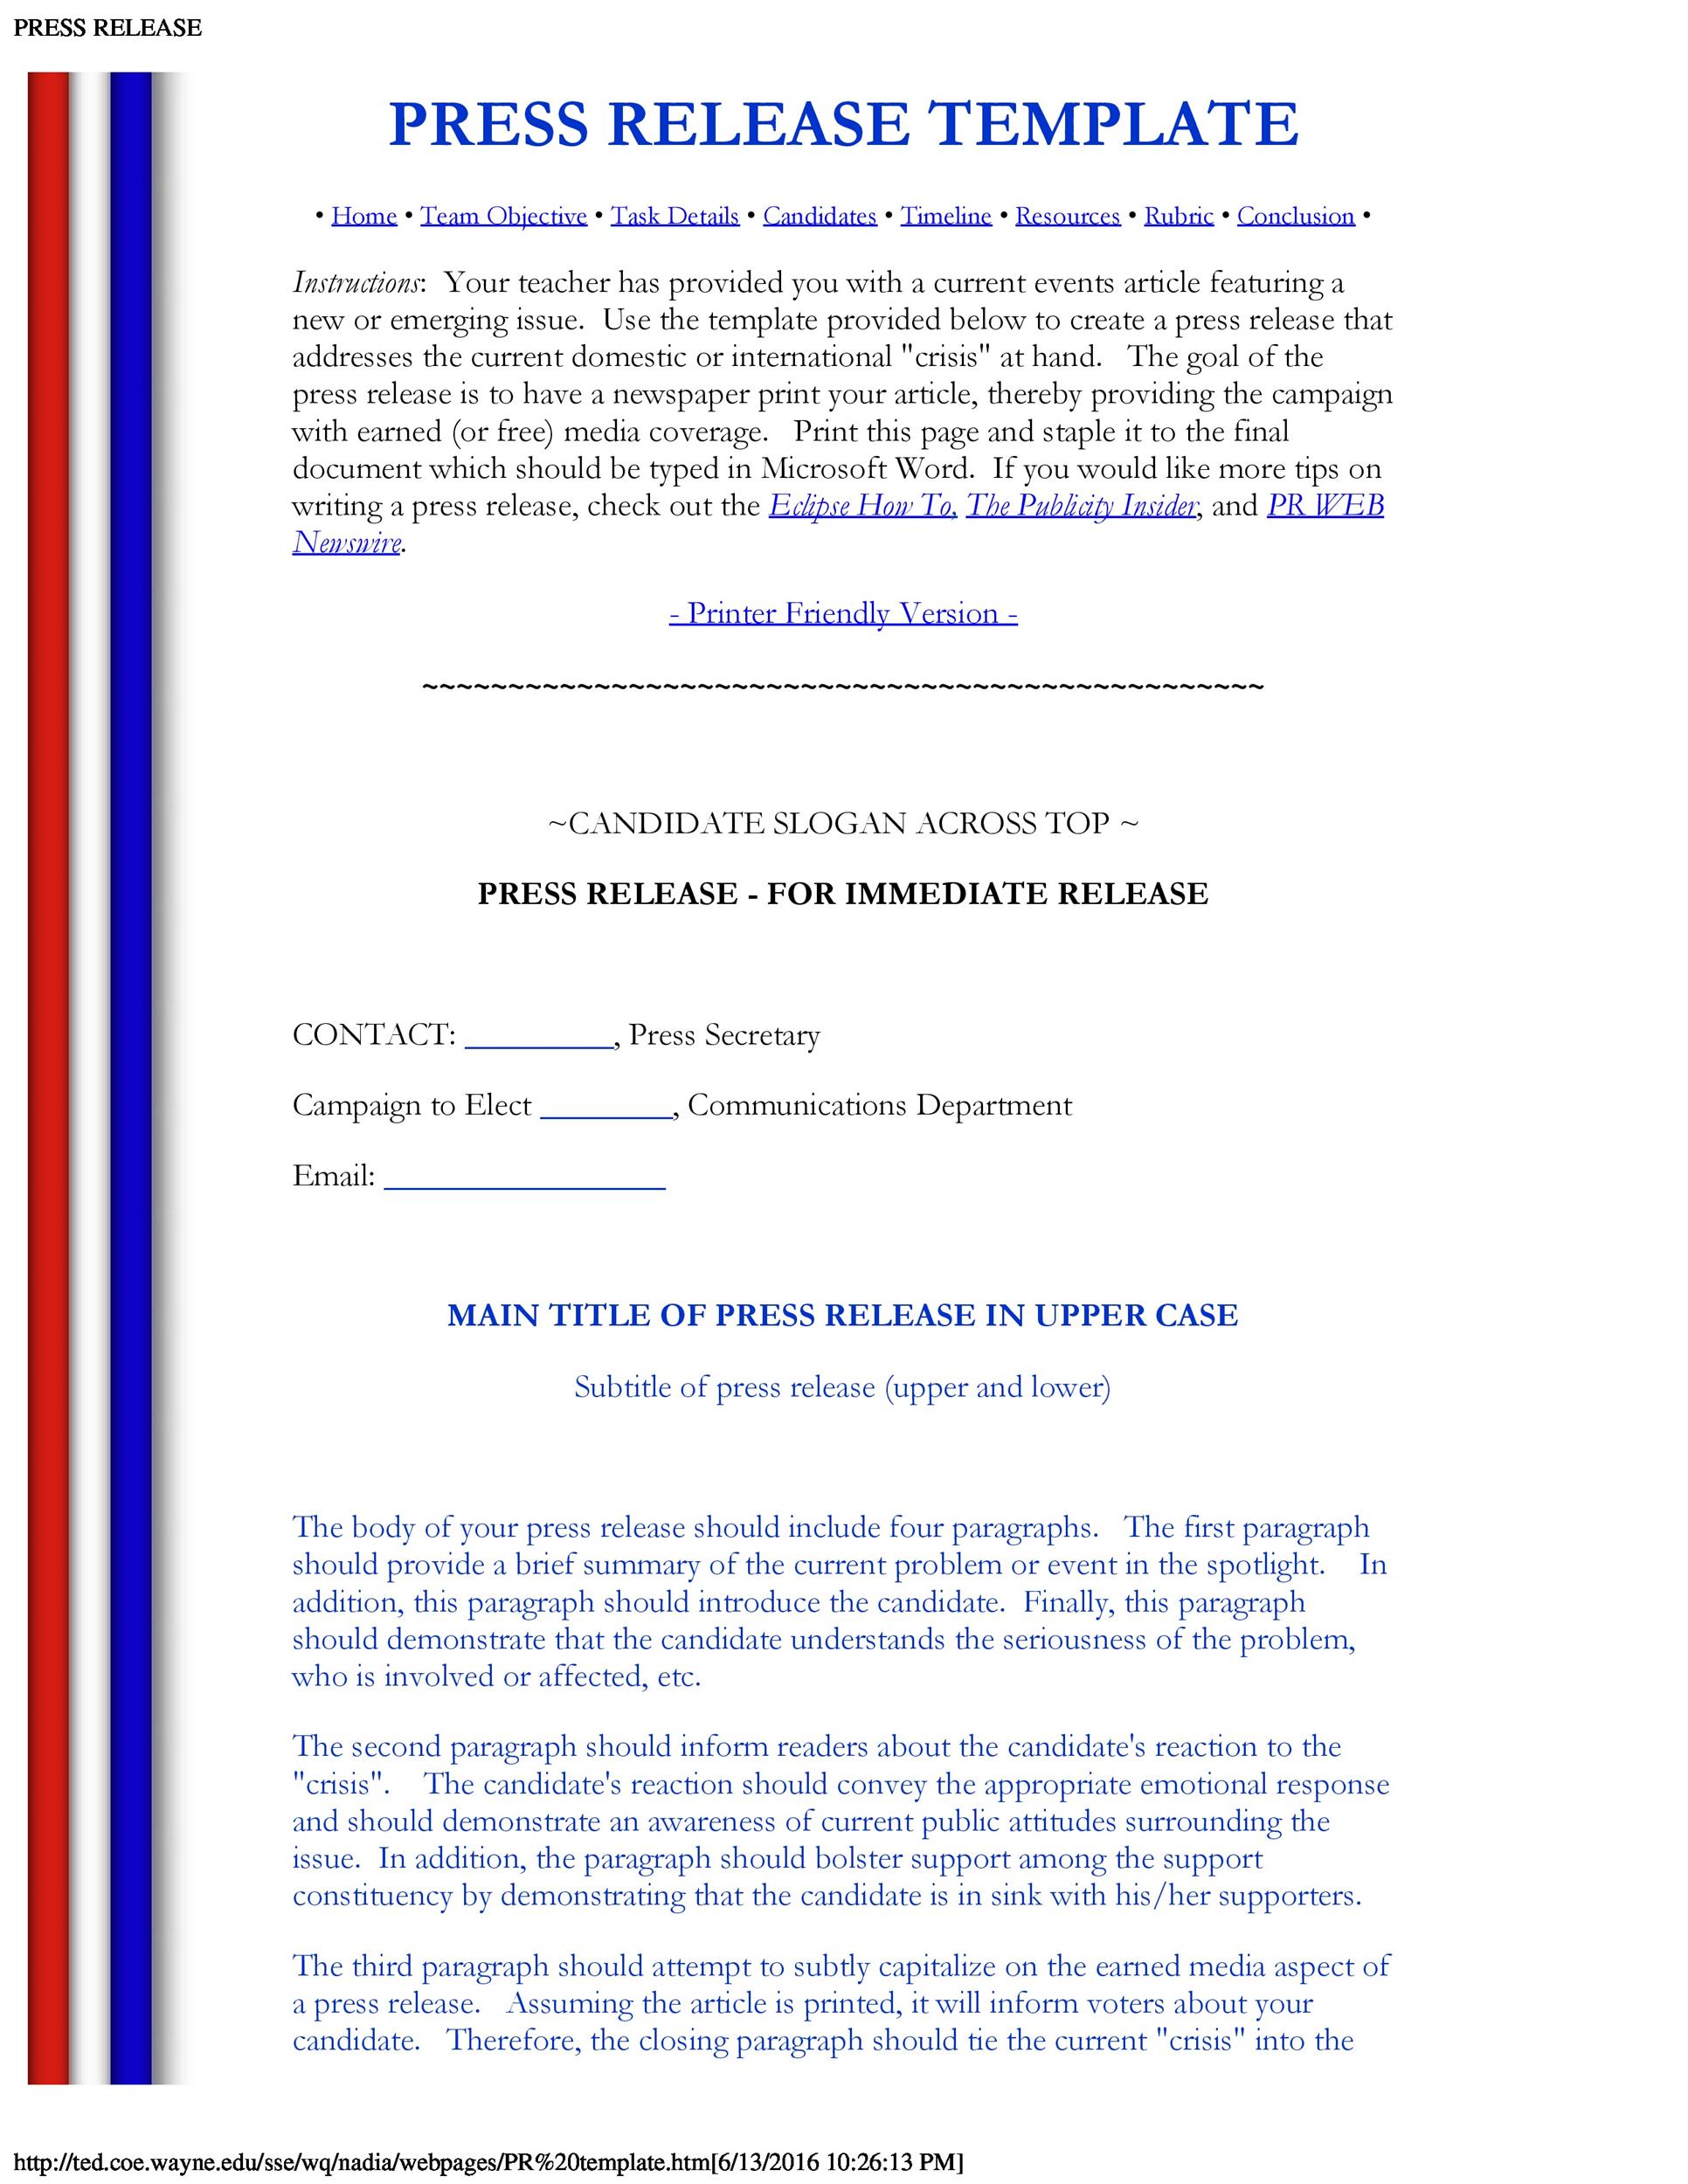 Free Press release template 31